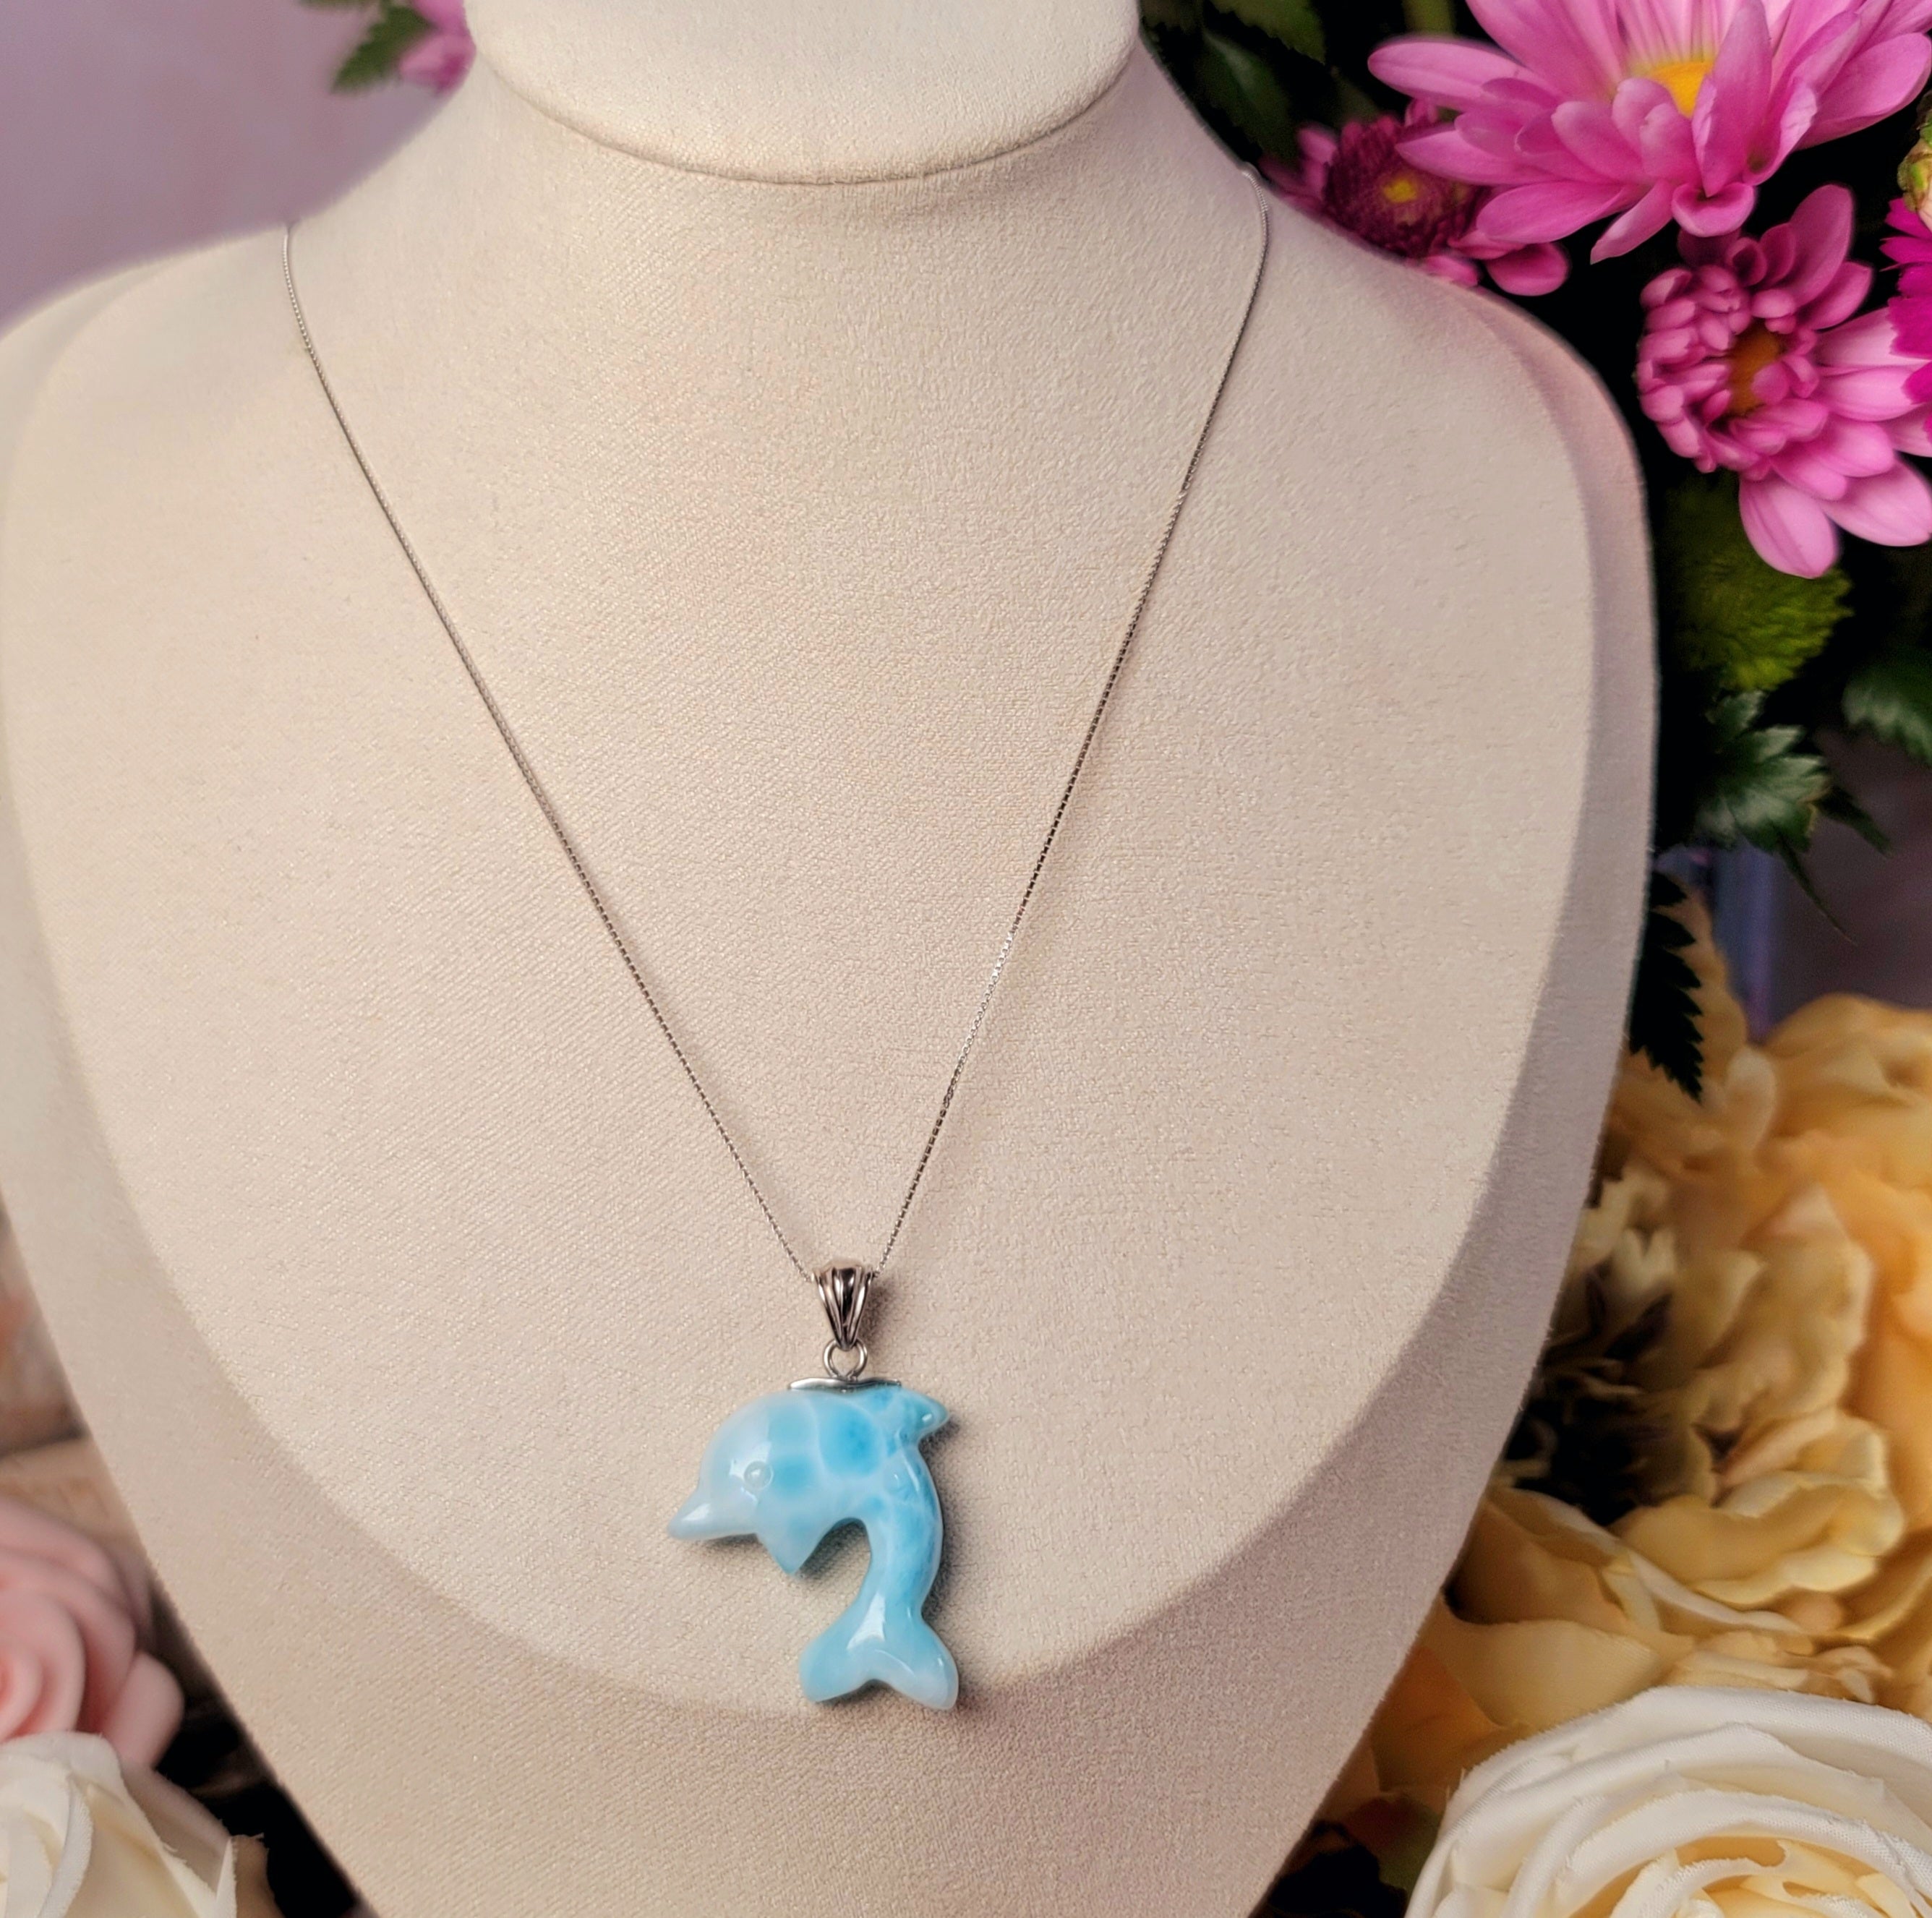 Larimar Dolphin Carving Necklace .925. Silver for Connection with the Divine Feminine in You